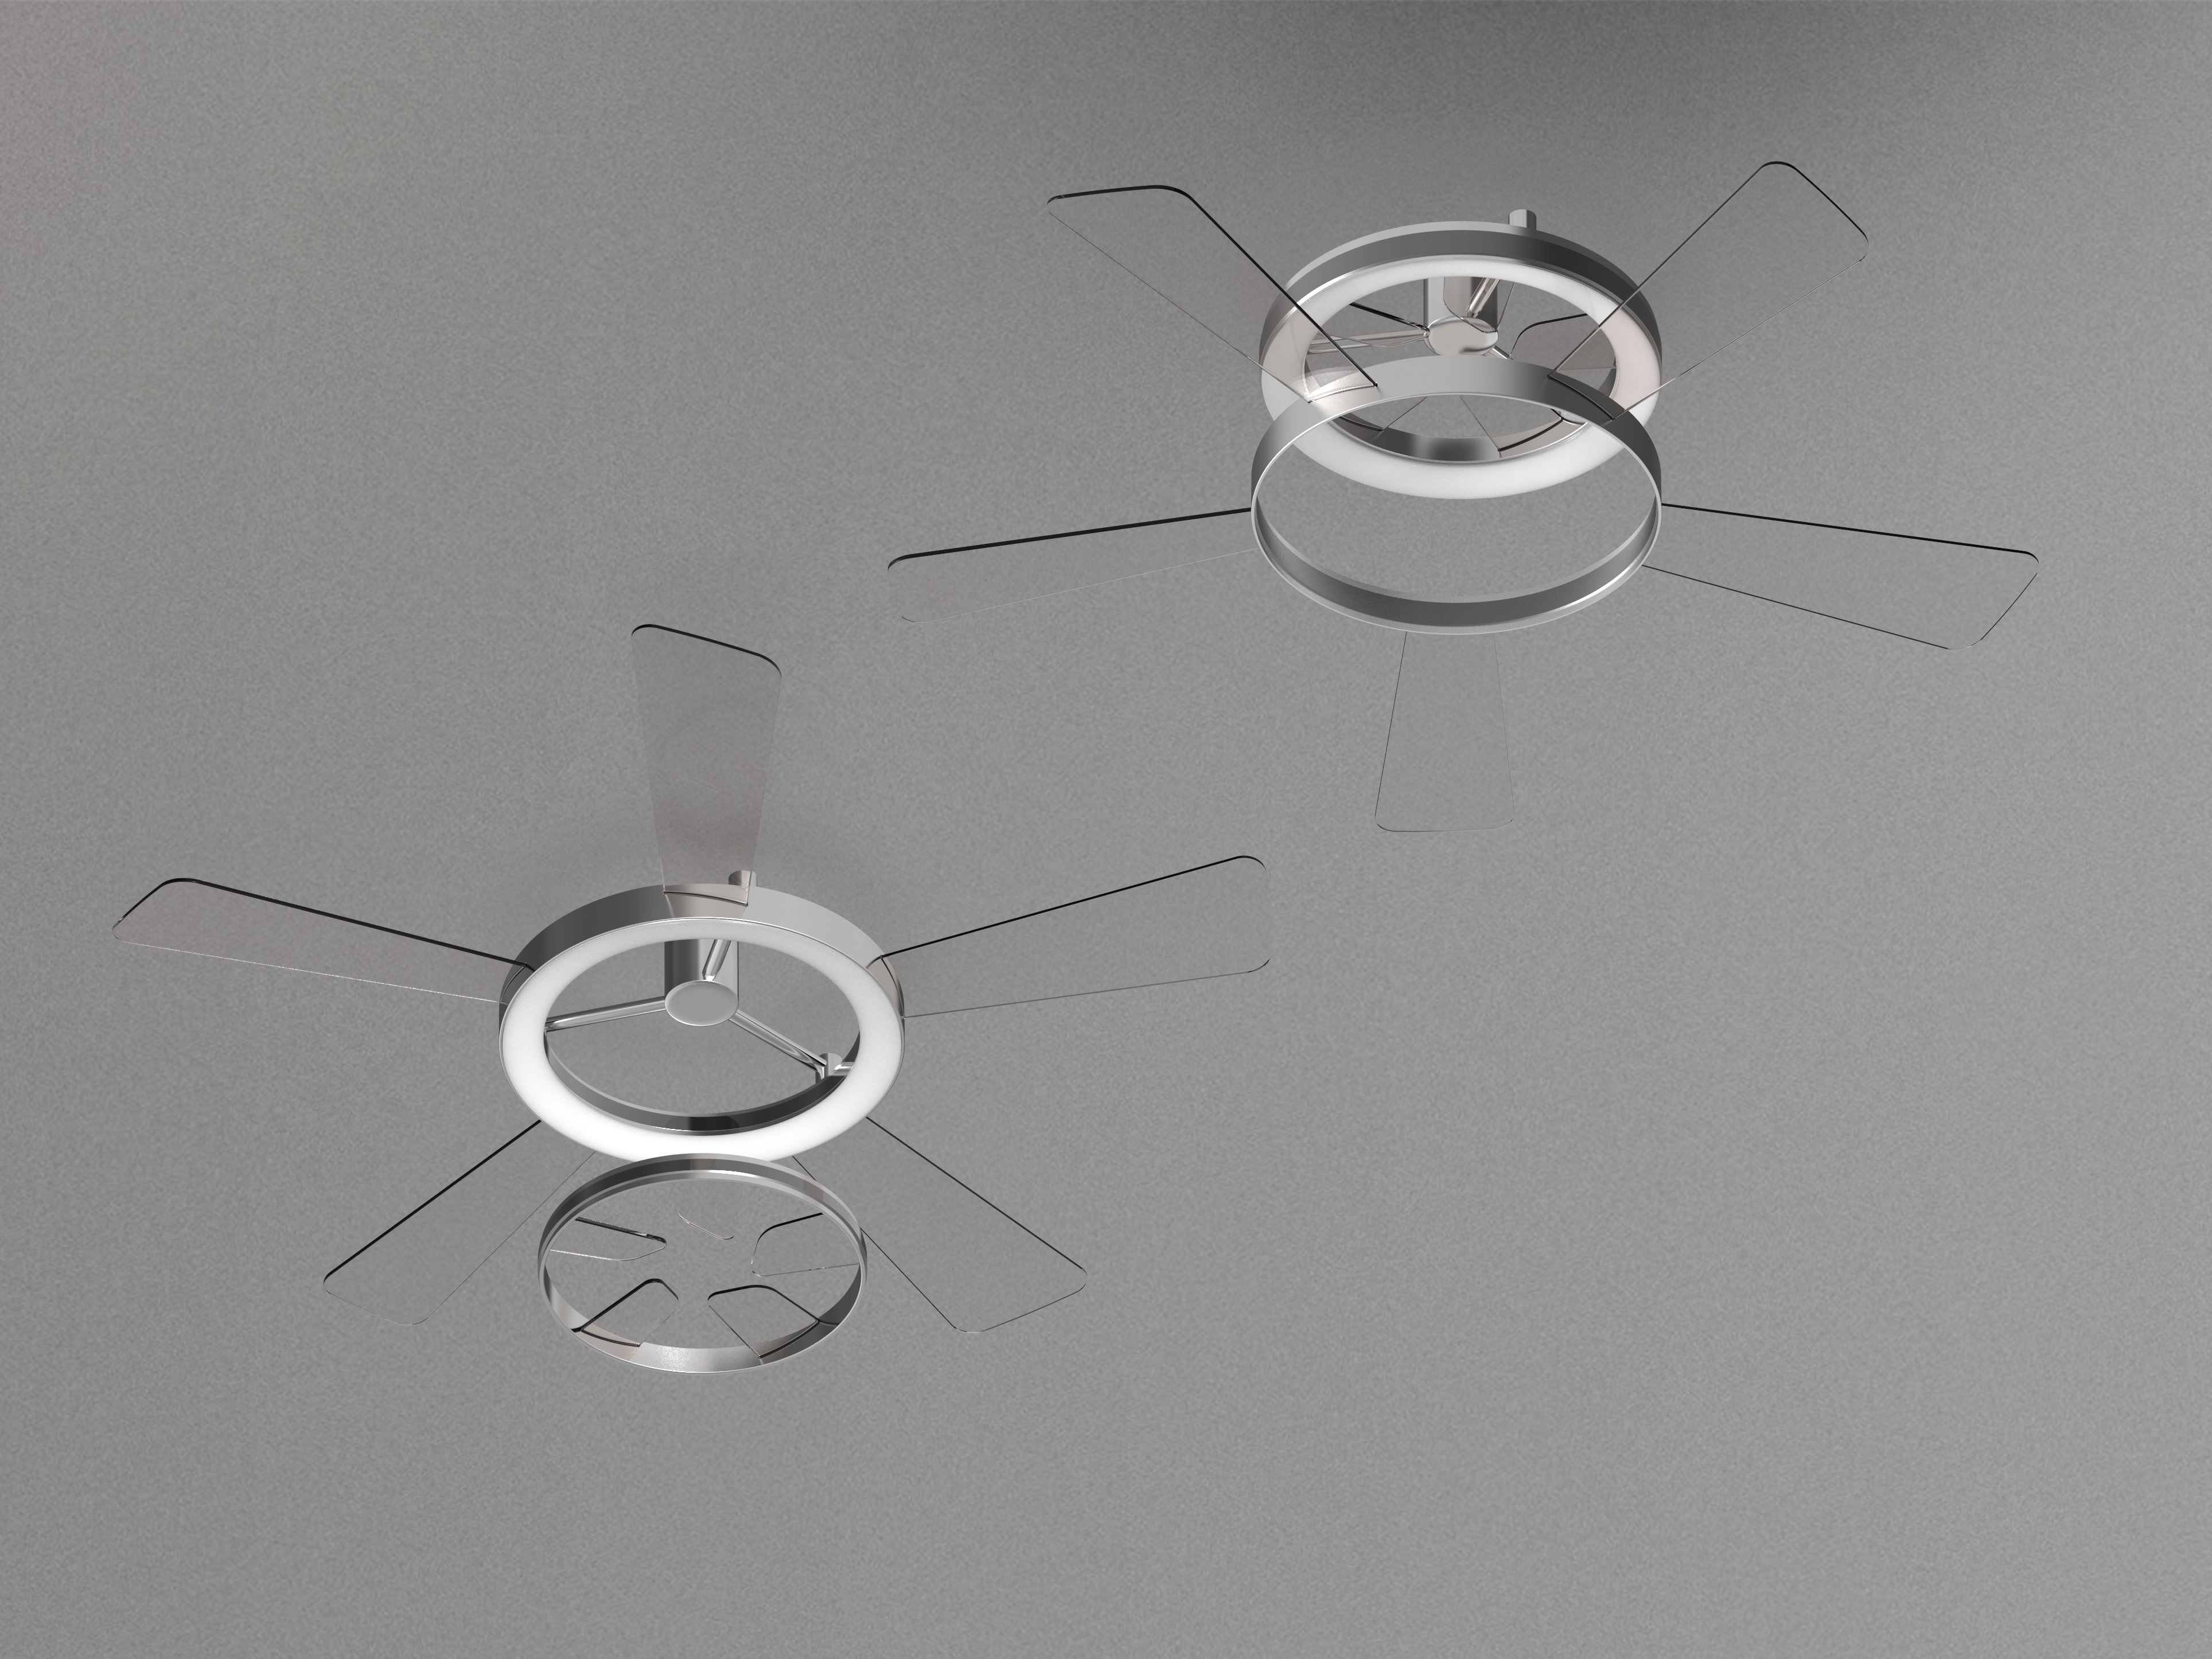 Magnetic Induction Ceiling Fan